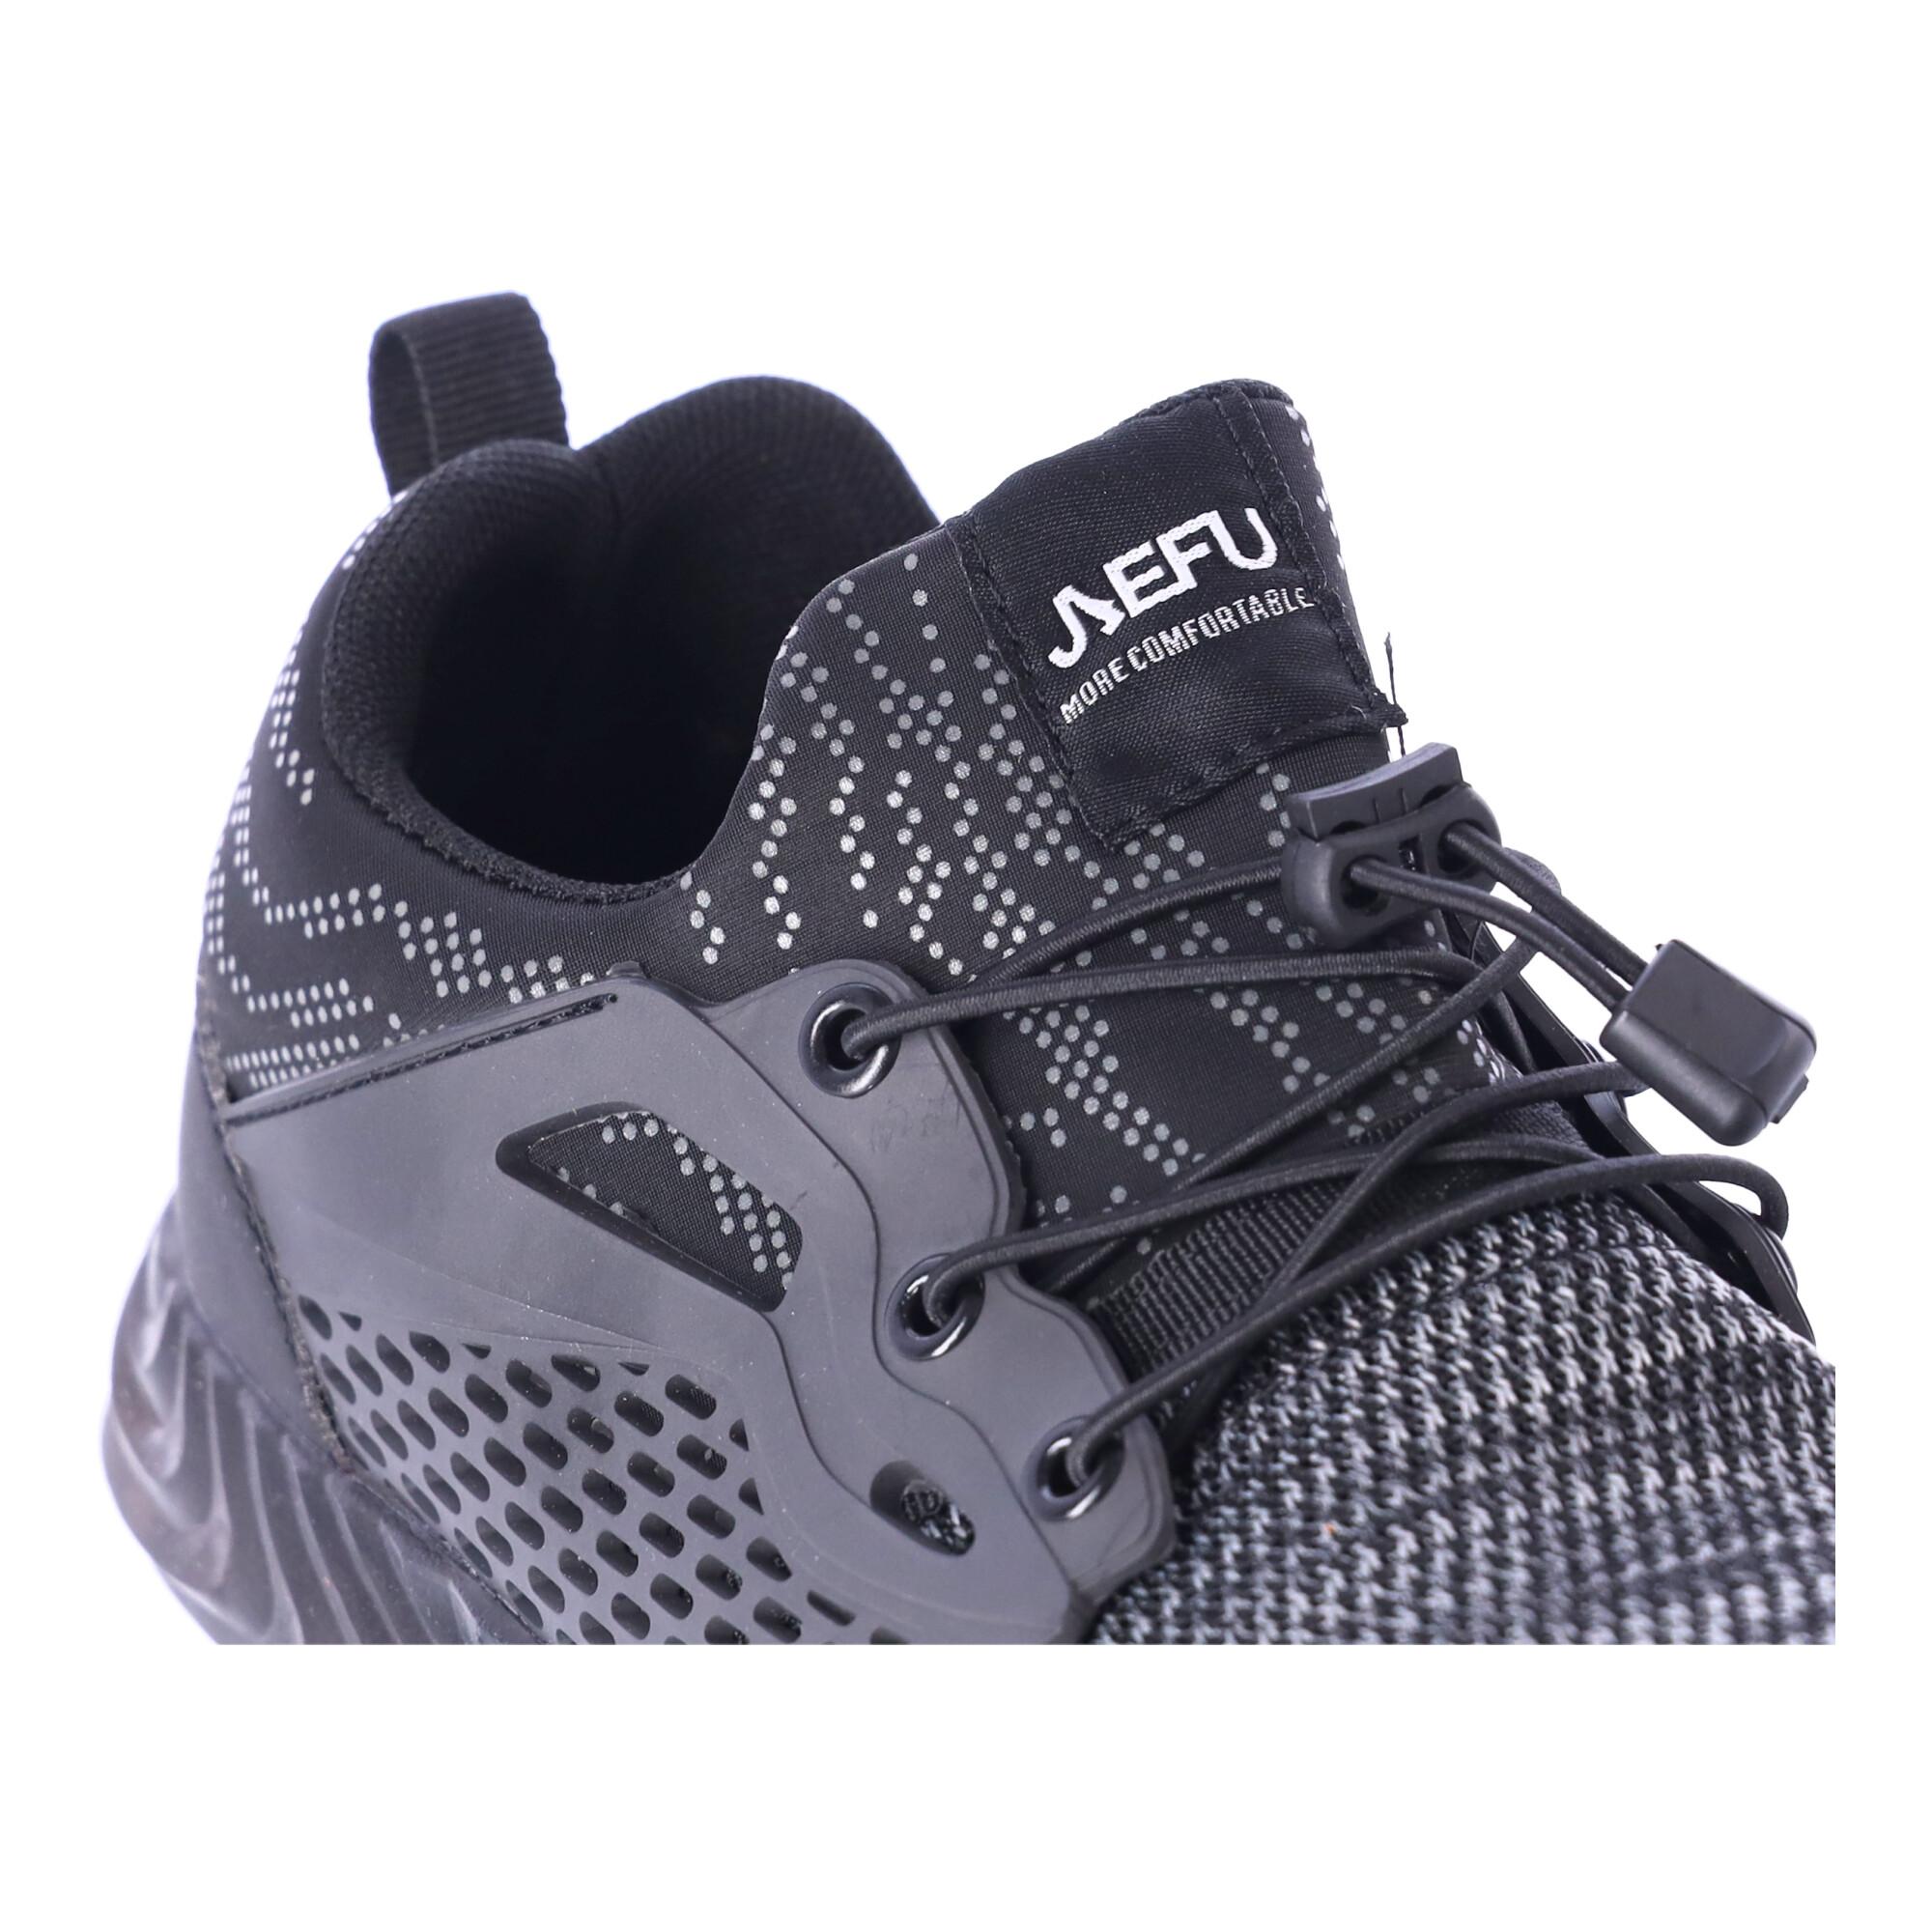 Work safety shoes "42" - gray